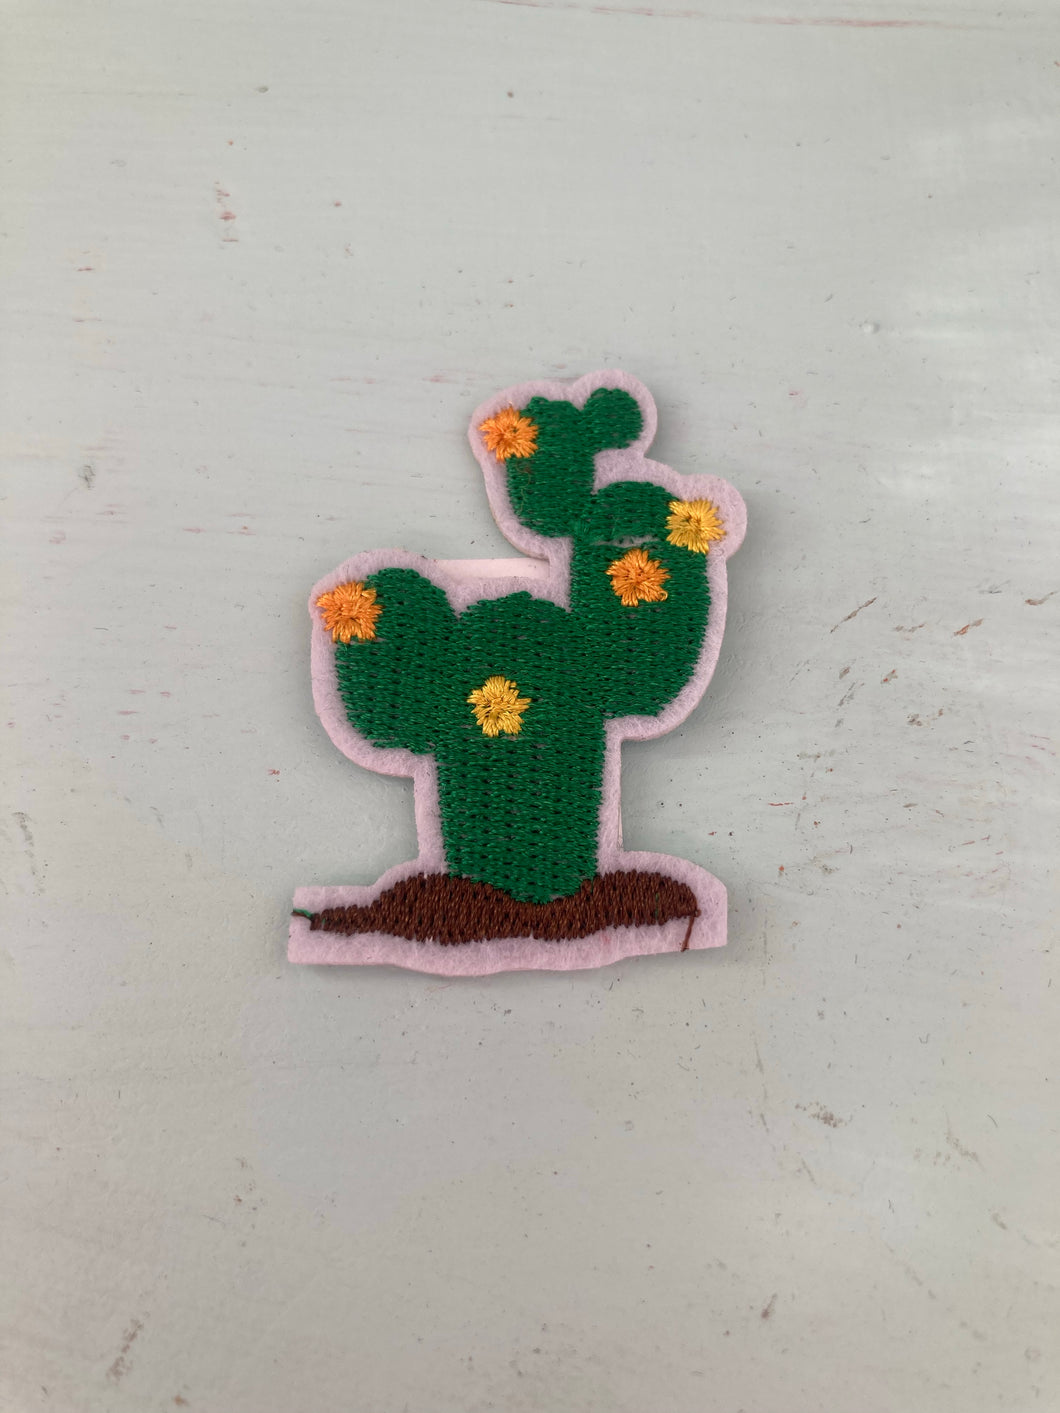 Prickly Pear Cactus with Yellow Flowers in Soil Mini Patch